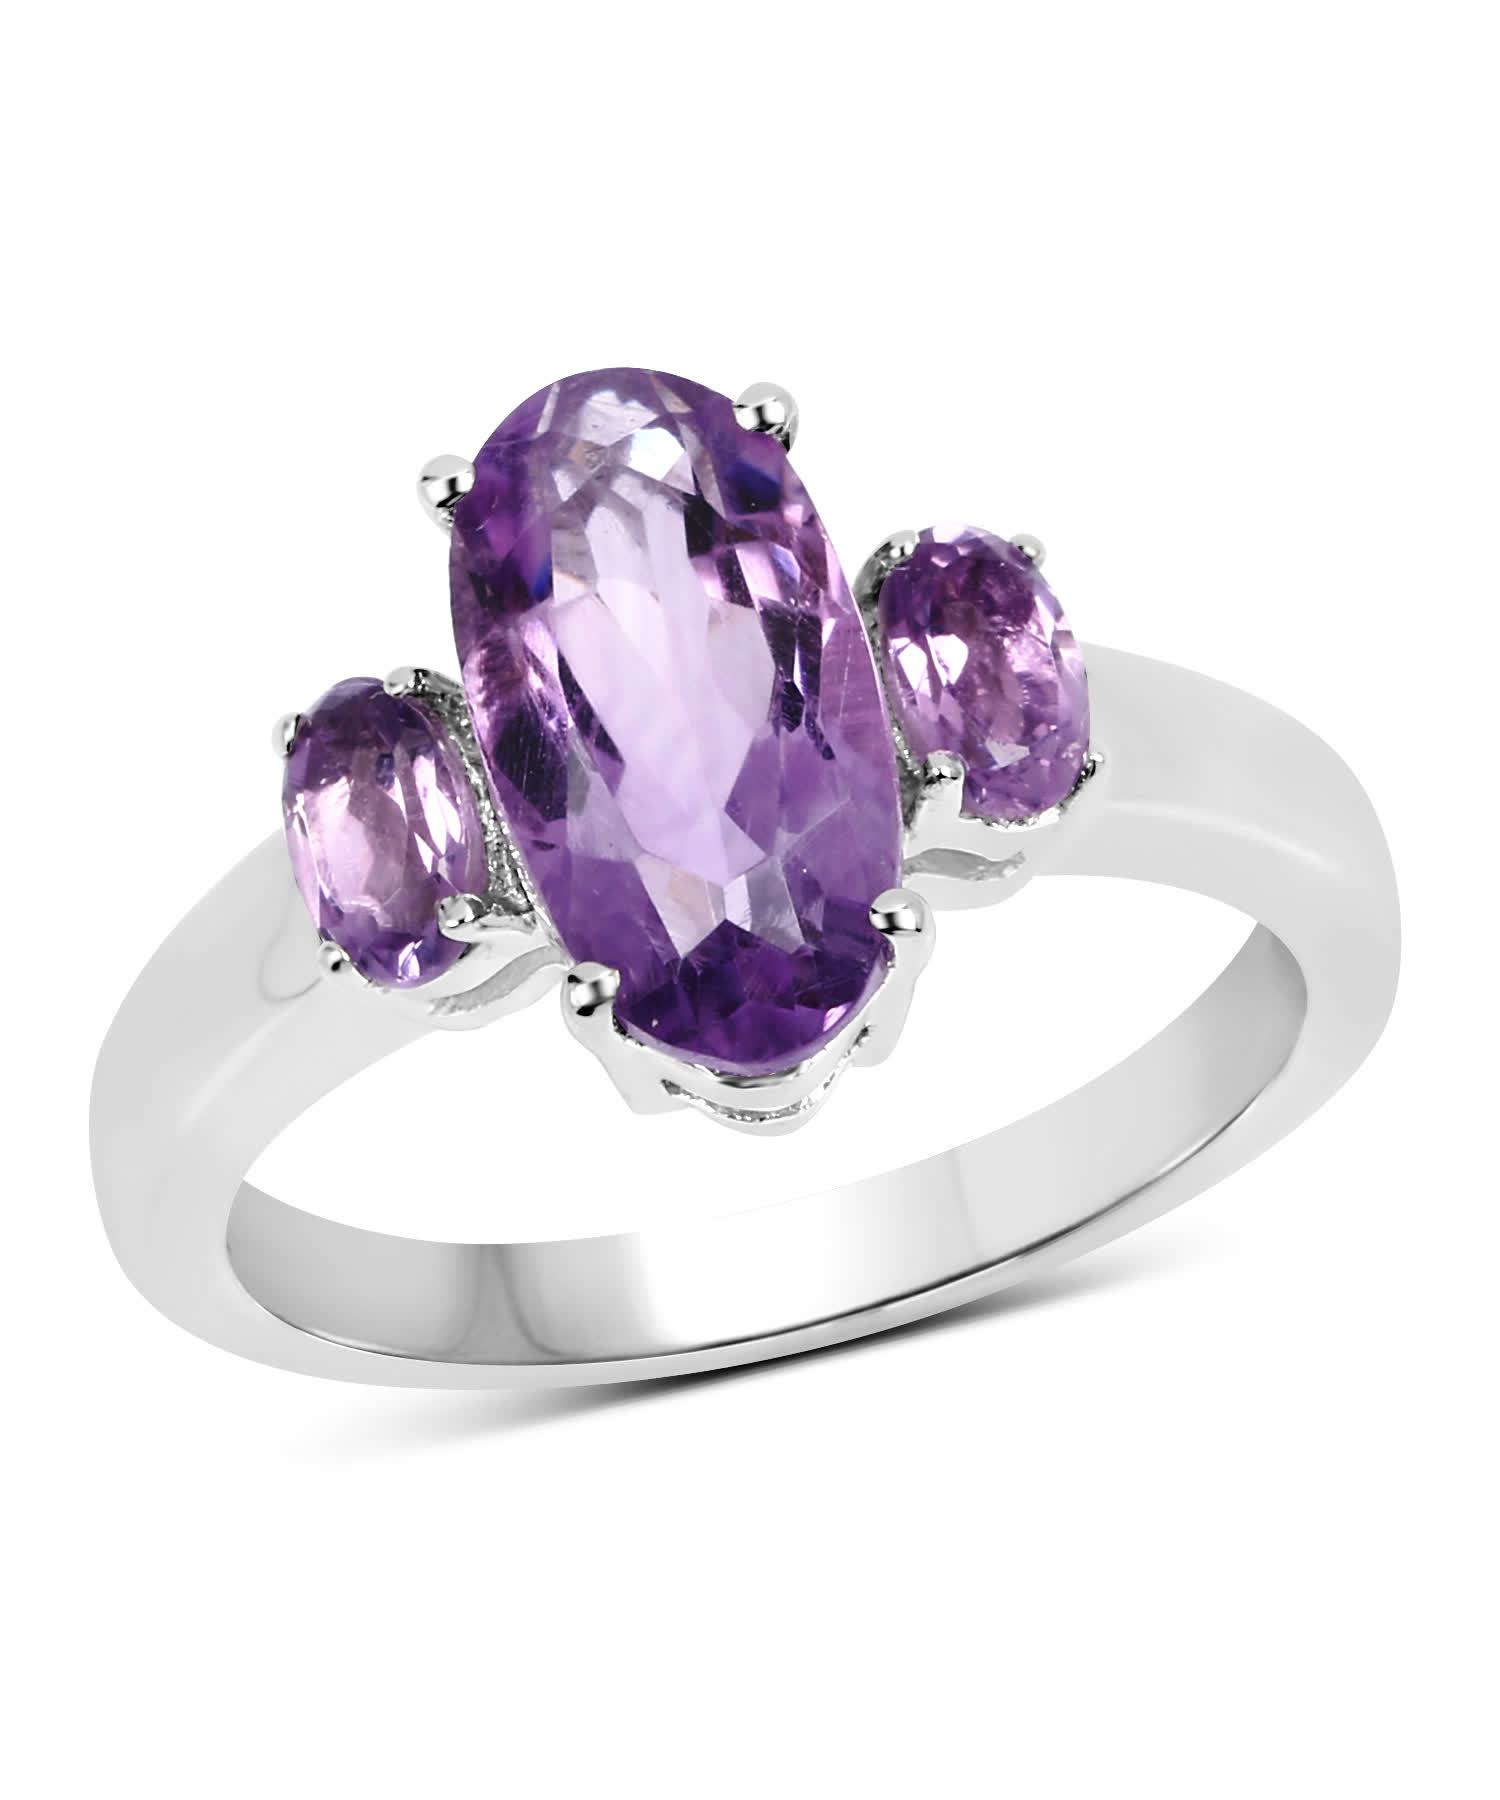 2.42ctw Natural Amethyst Rhodium Plated 925 Sterling Silver Three-Stone Ring View 1